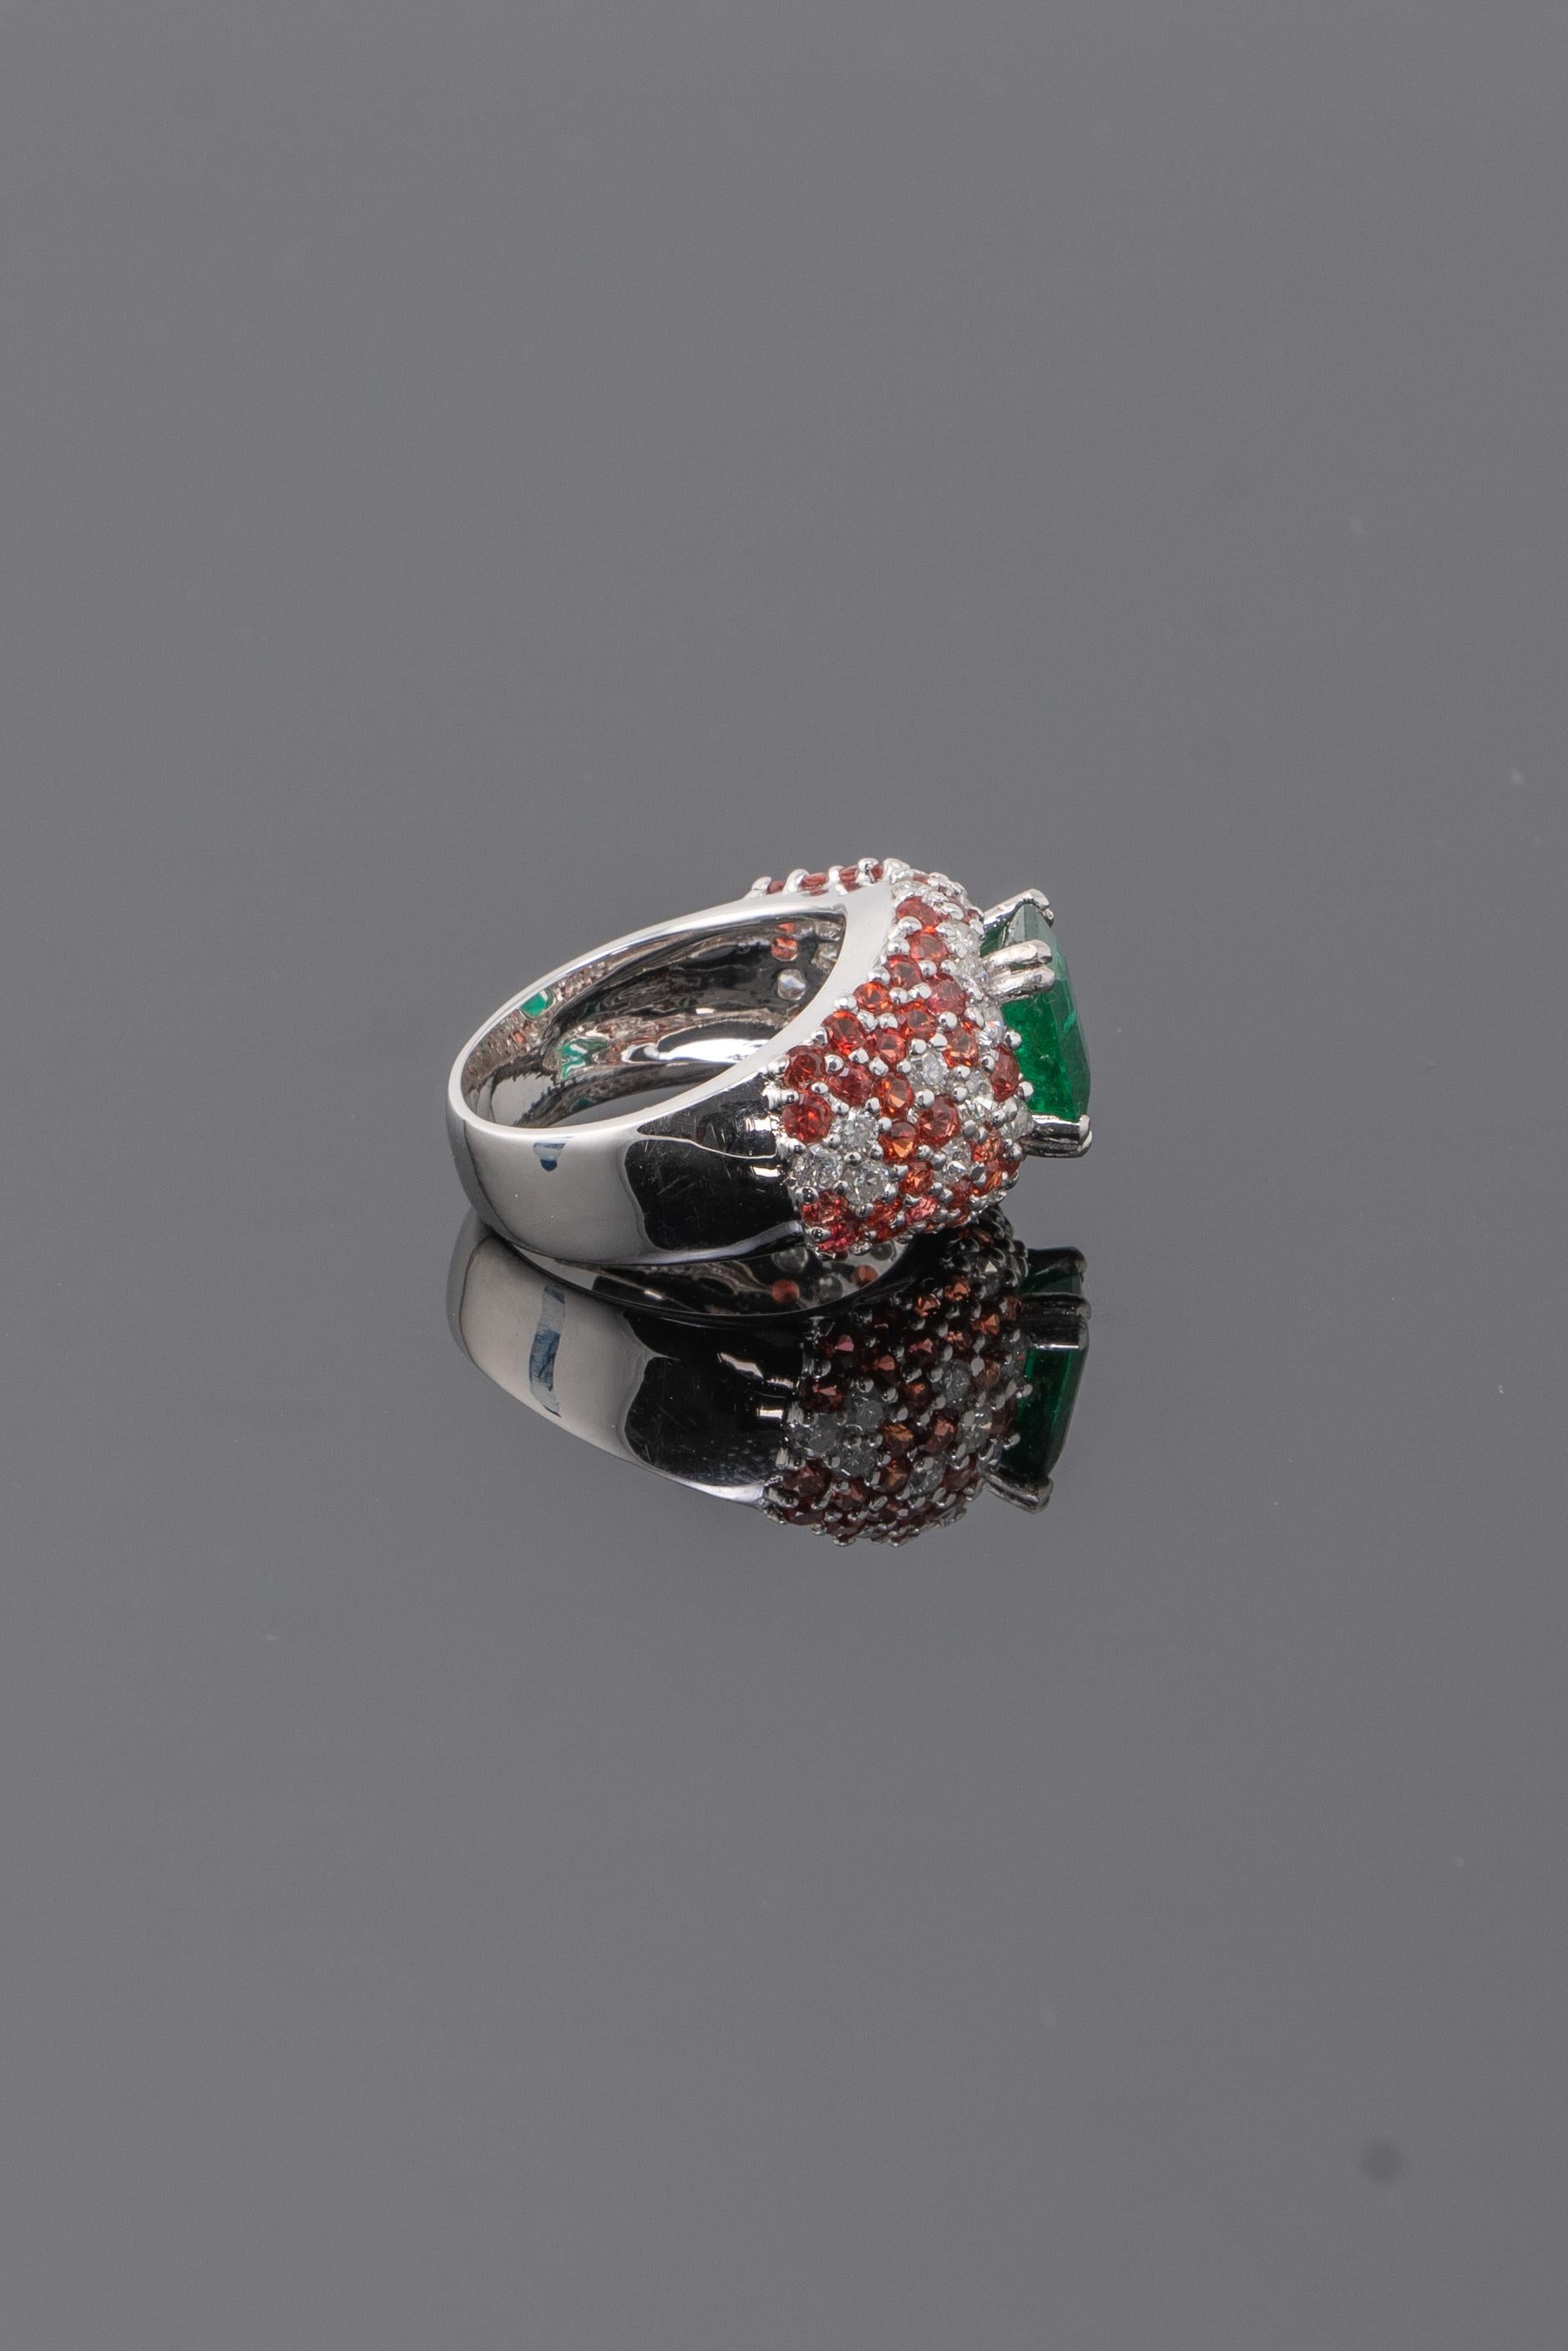 An splendid cocktail ring, with a 2.16 carat transparent natural Zambian Emerald center stone surrounded with sparkling diamonds and magnificent round eye clean orange sapphires . The emerald is transparent with good luster and color, with few